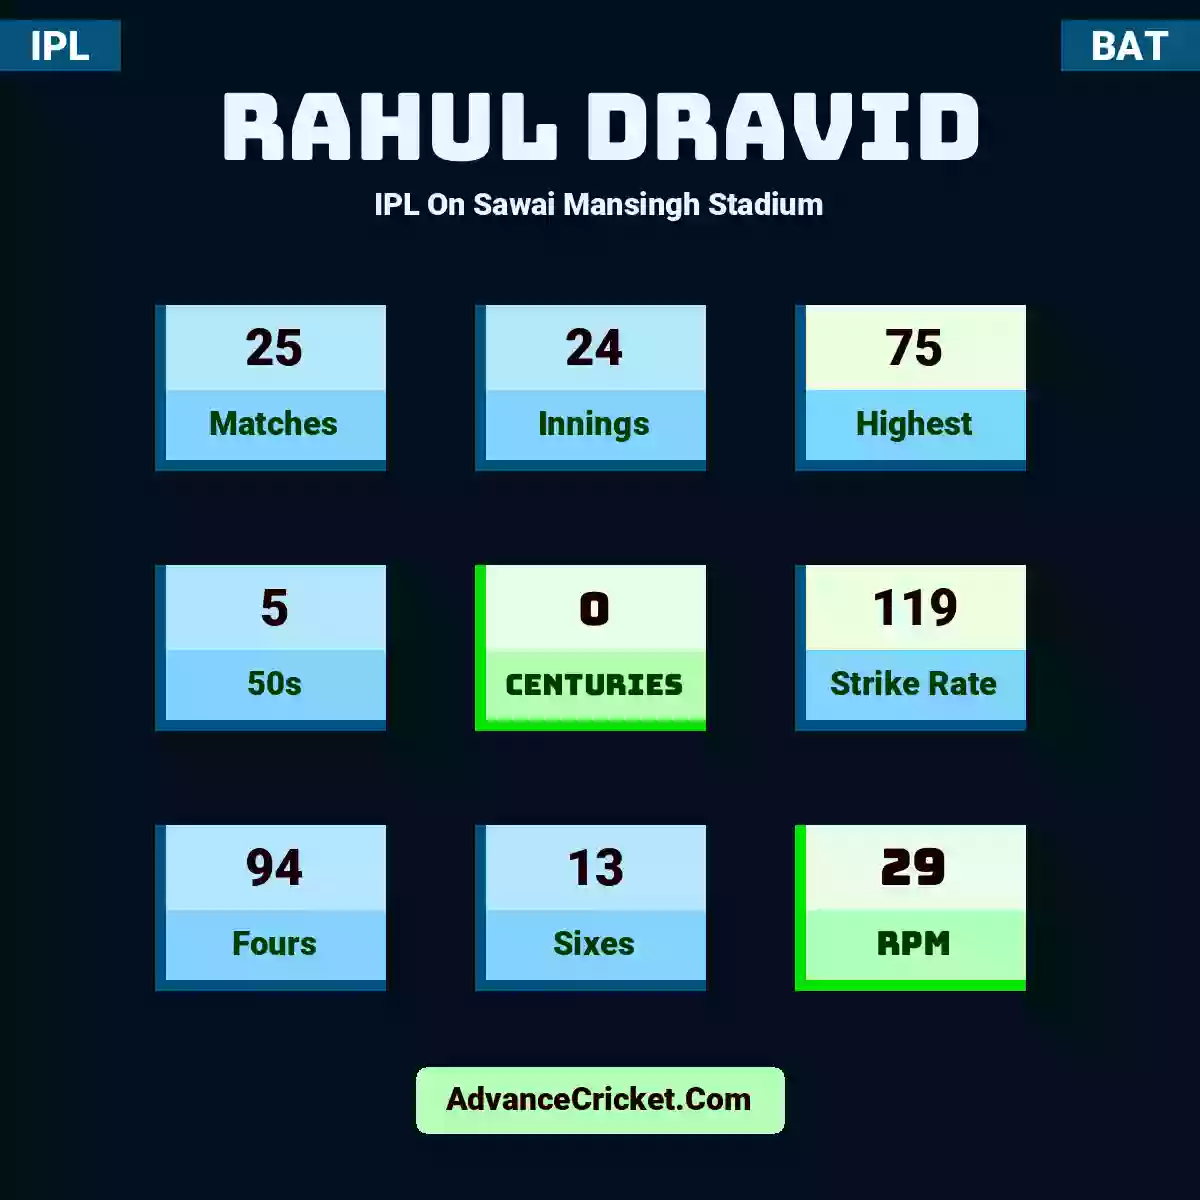 Rahul Dravid IPL  On Sawai Mansingh Stadium, Rahul Dravid played 25 matches, scored 75 runs as highest, 5 half-centuries, and 0 centuries, with a strike rate of 119. R.Dravid hit 94 fours and 13 sixes, with an RPM of 29.